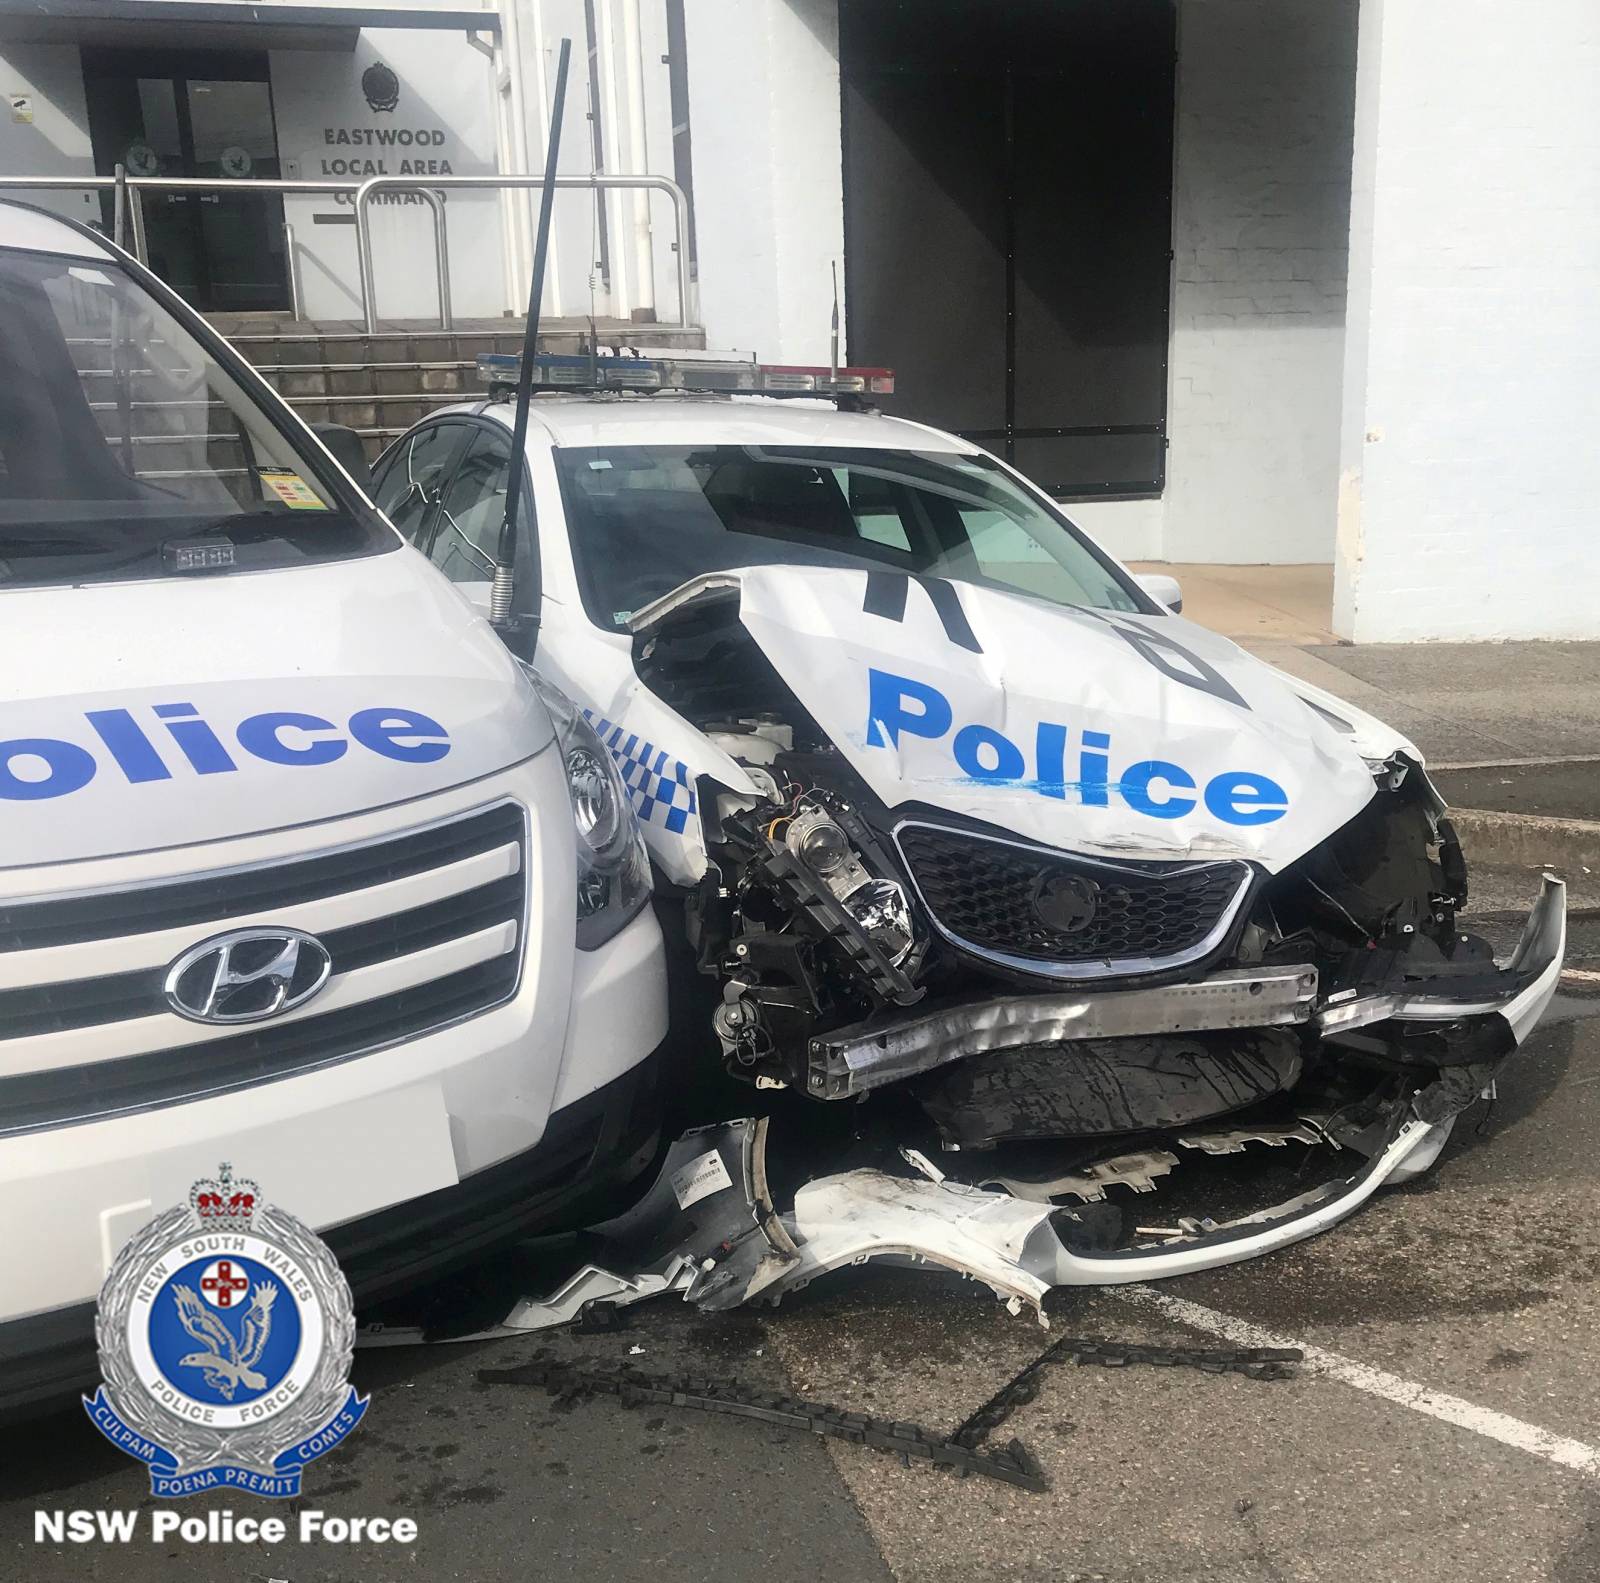 The wreckage of a police patrol car after it was hit by a van laden with methamphetamines outside a police station in Eastwood